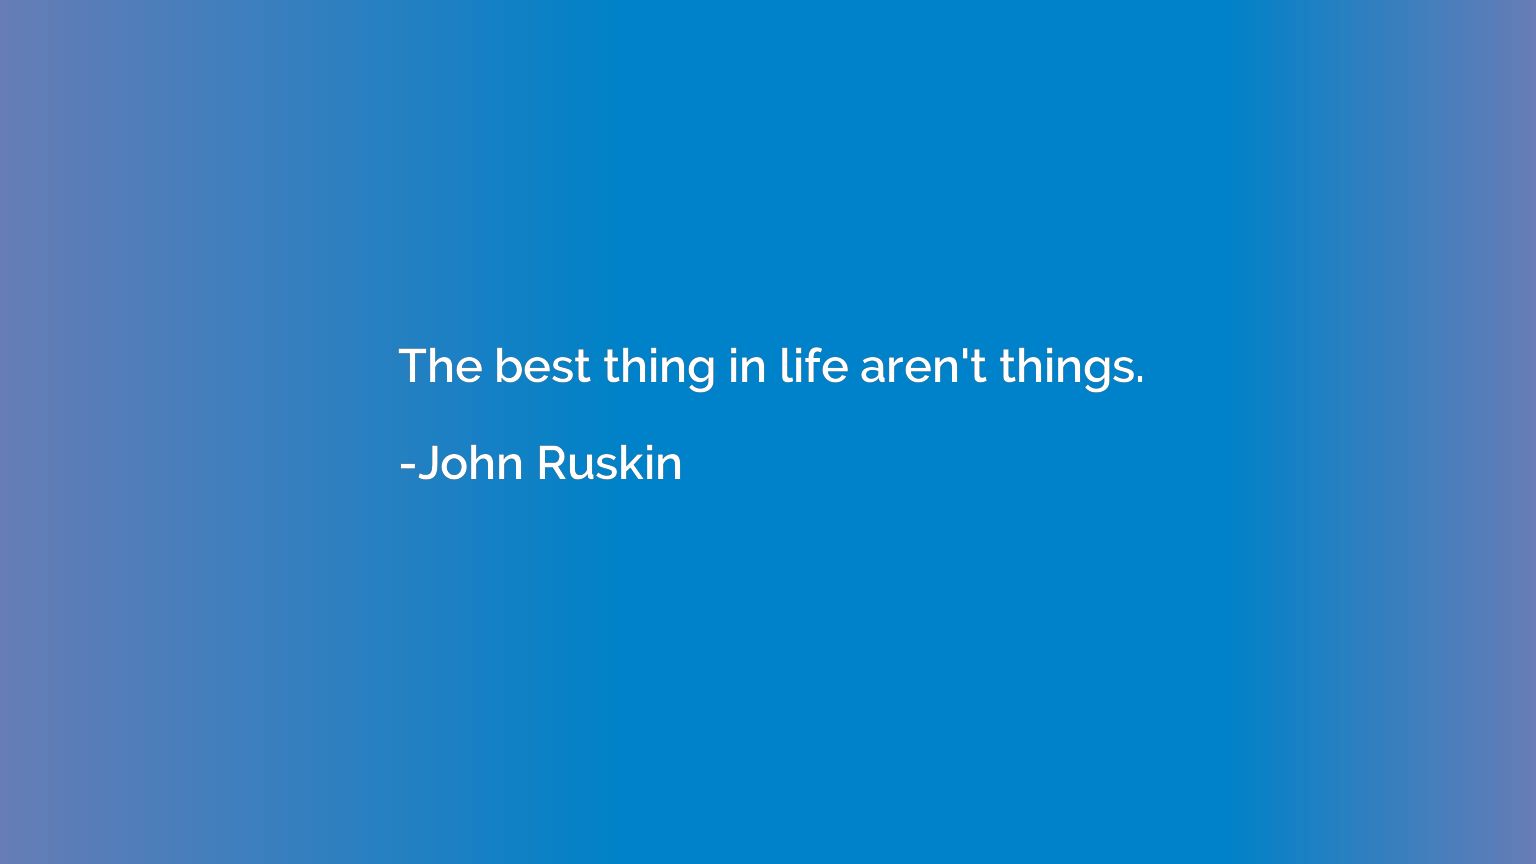 The best thing in life aren't things.